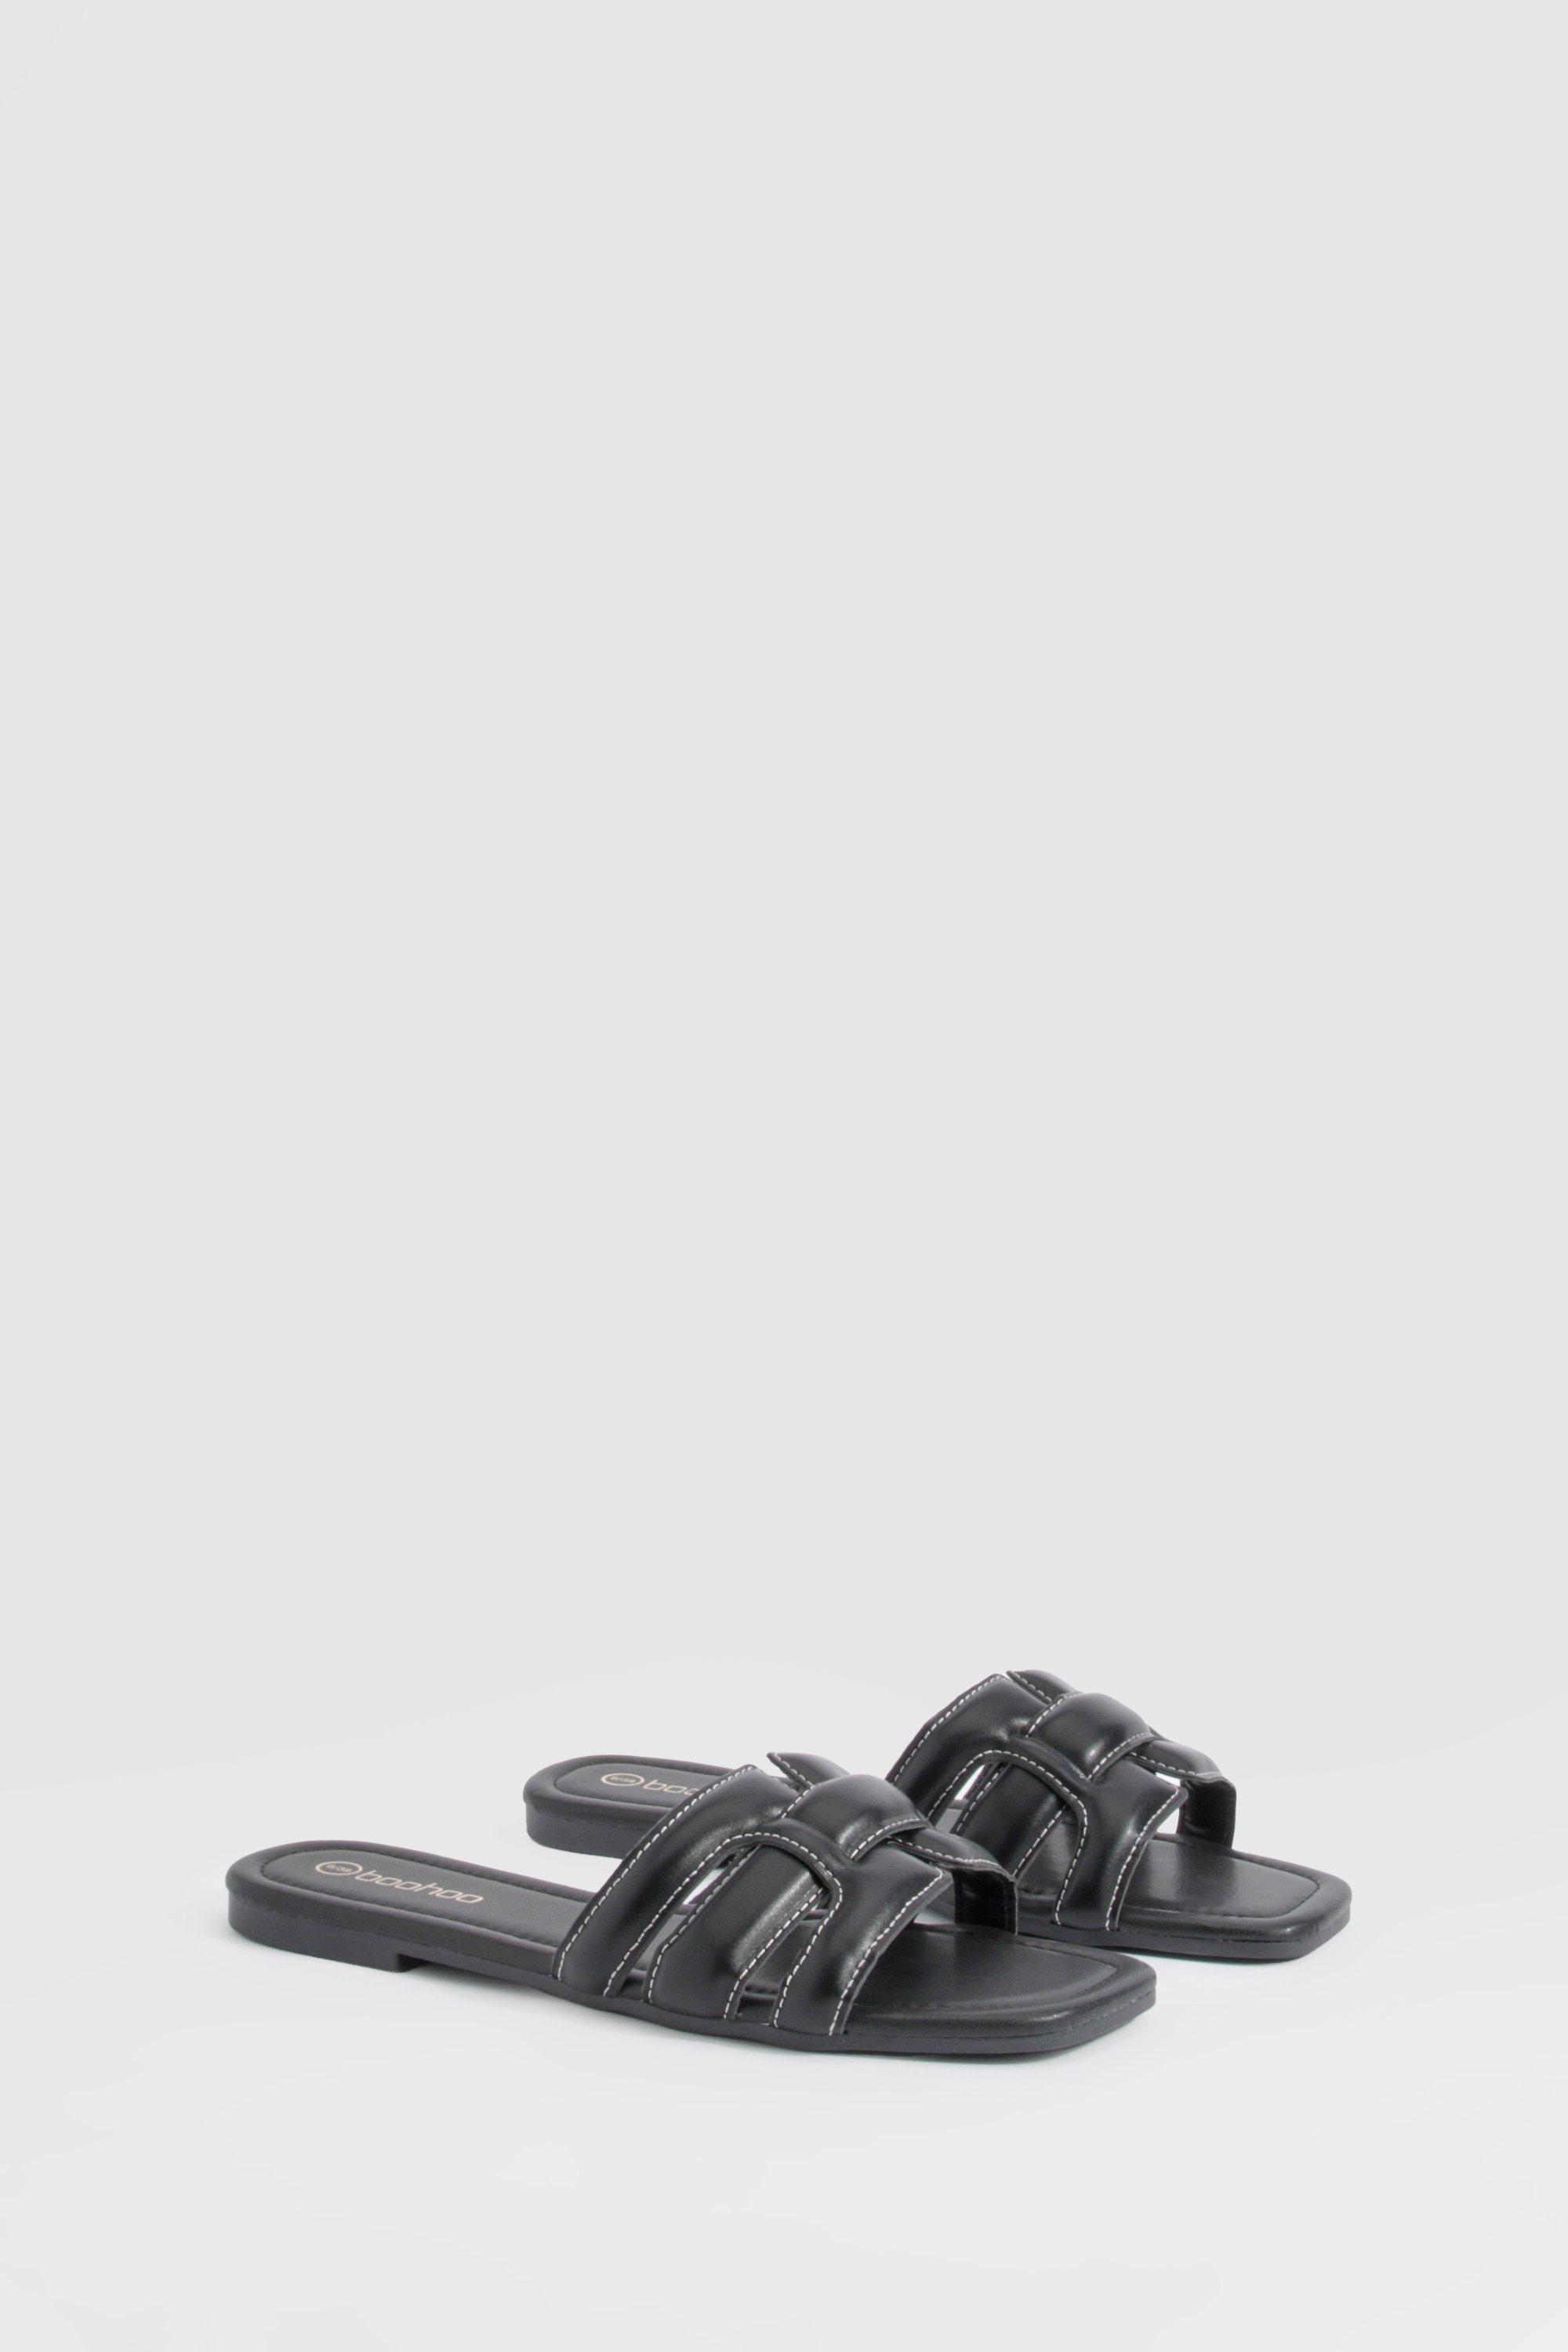 Image of Contrast Stitch Woven Mule Sandals, Nero